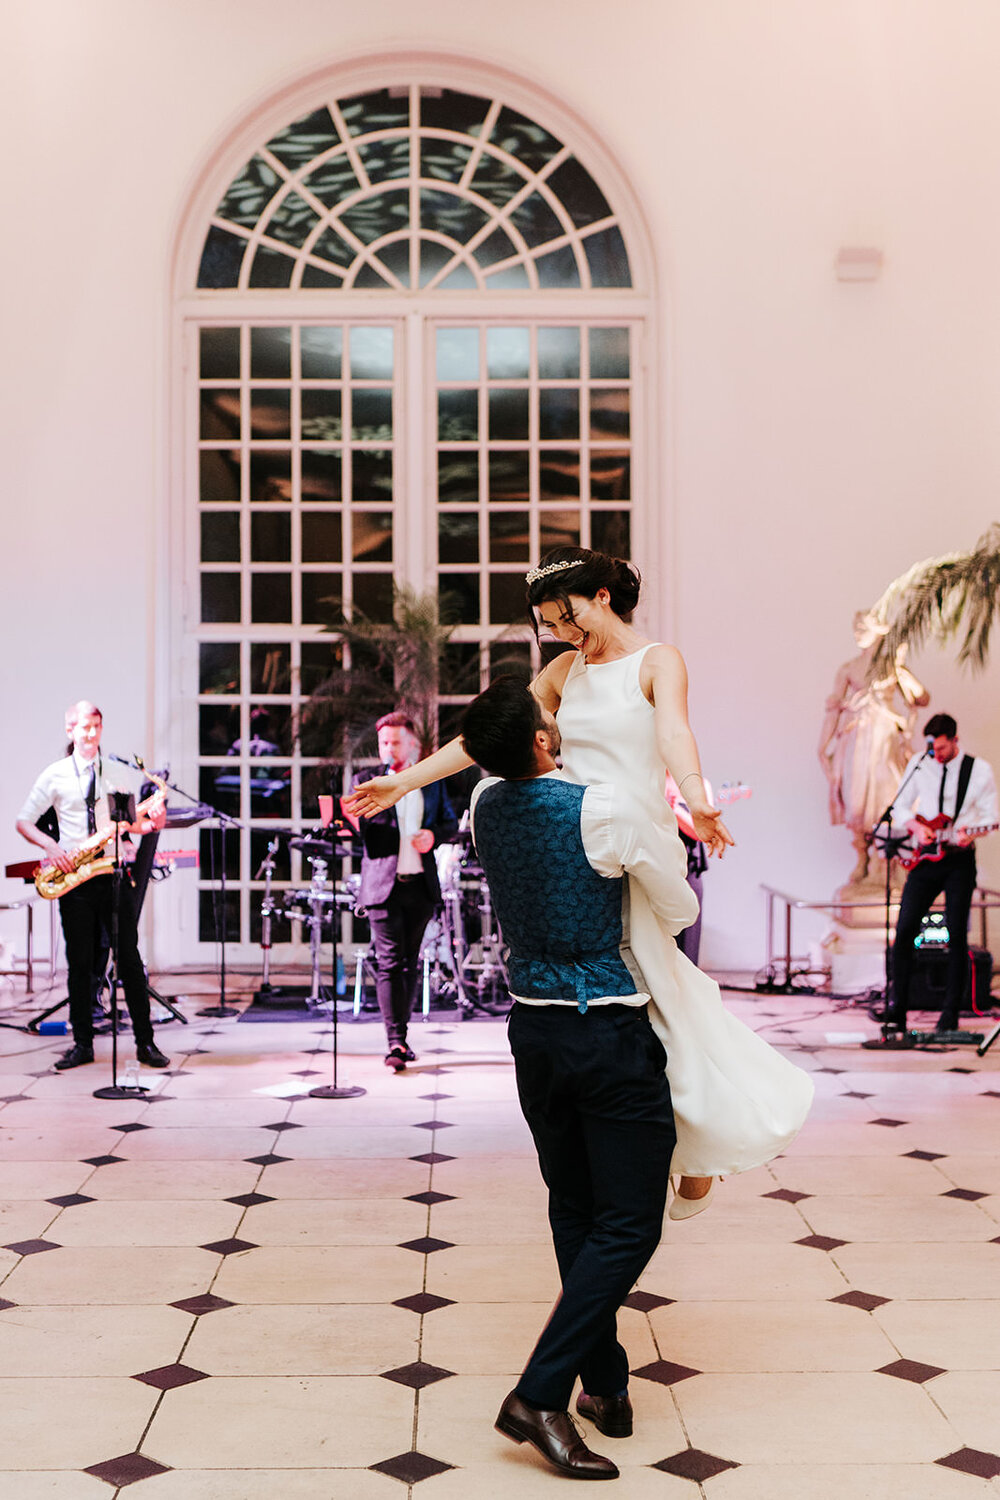 Groom lifts bride during first dance at wedding in Kew Gardens, Richmond while bride throws her hands outwards and band plays in the background in front of perfectly framed window